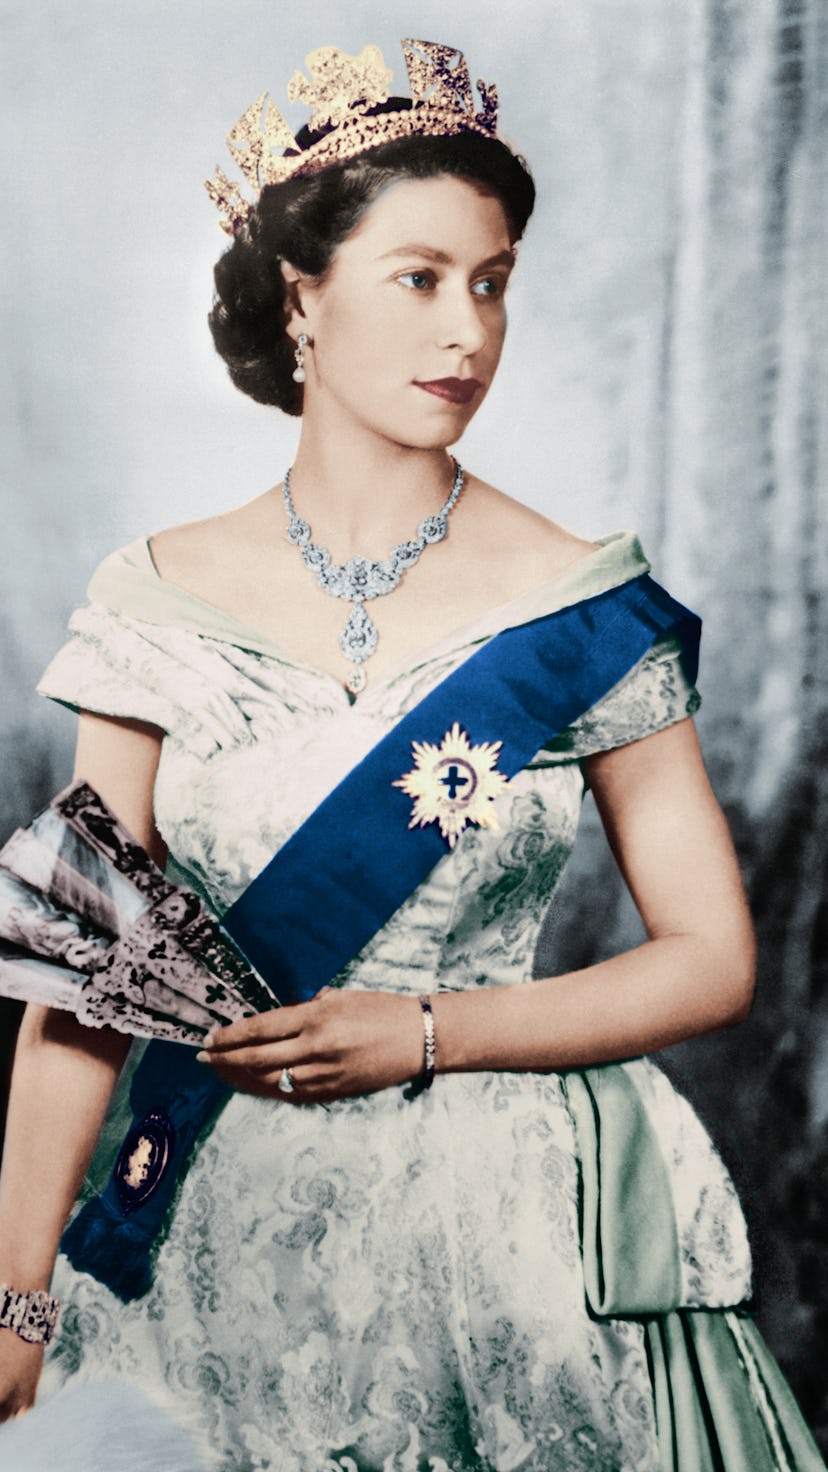 Queen Elizabeth's style through the years includes this iconic fashion portrait of Queen Elizabeth